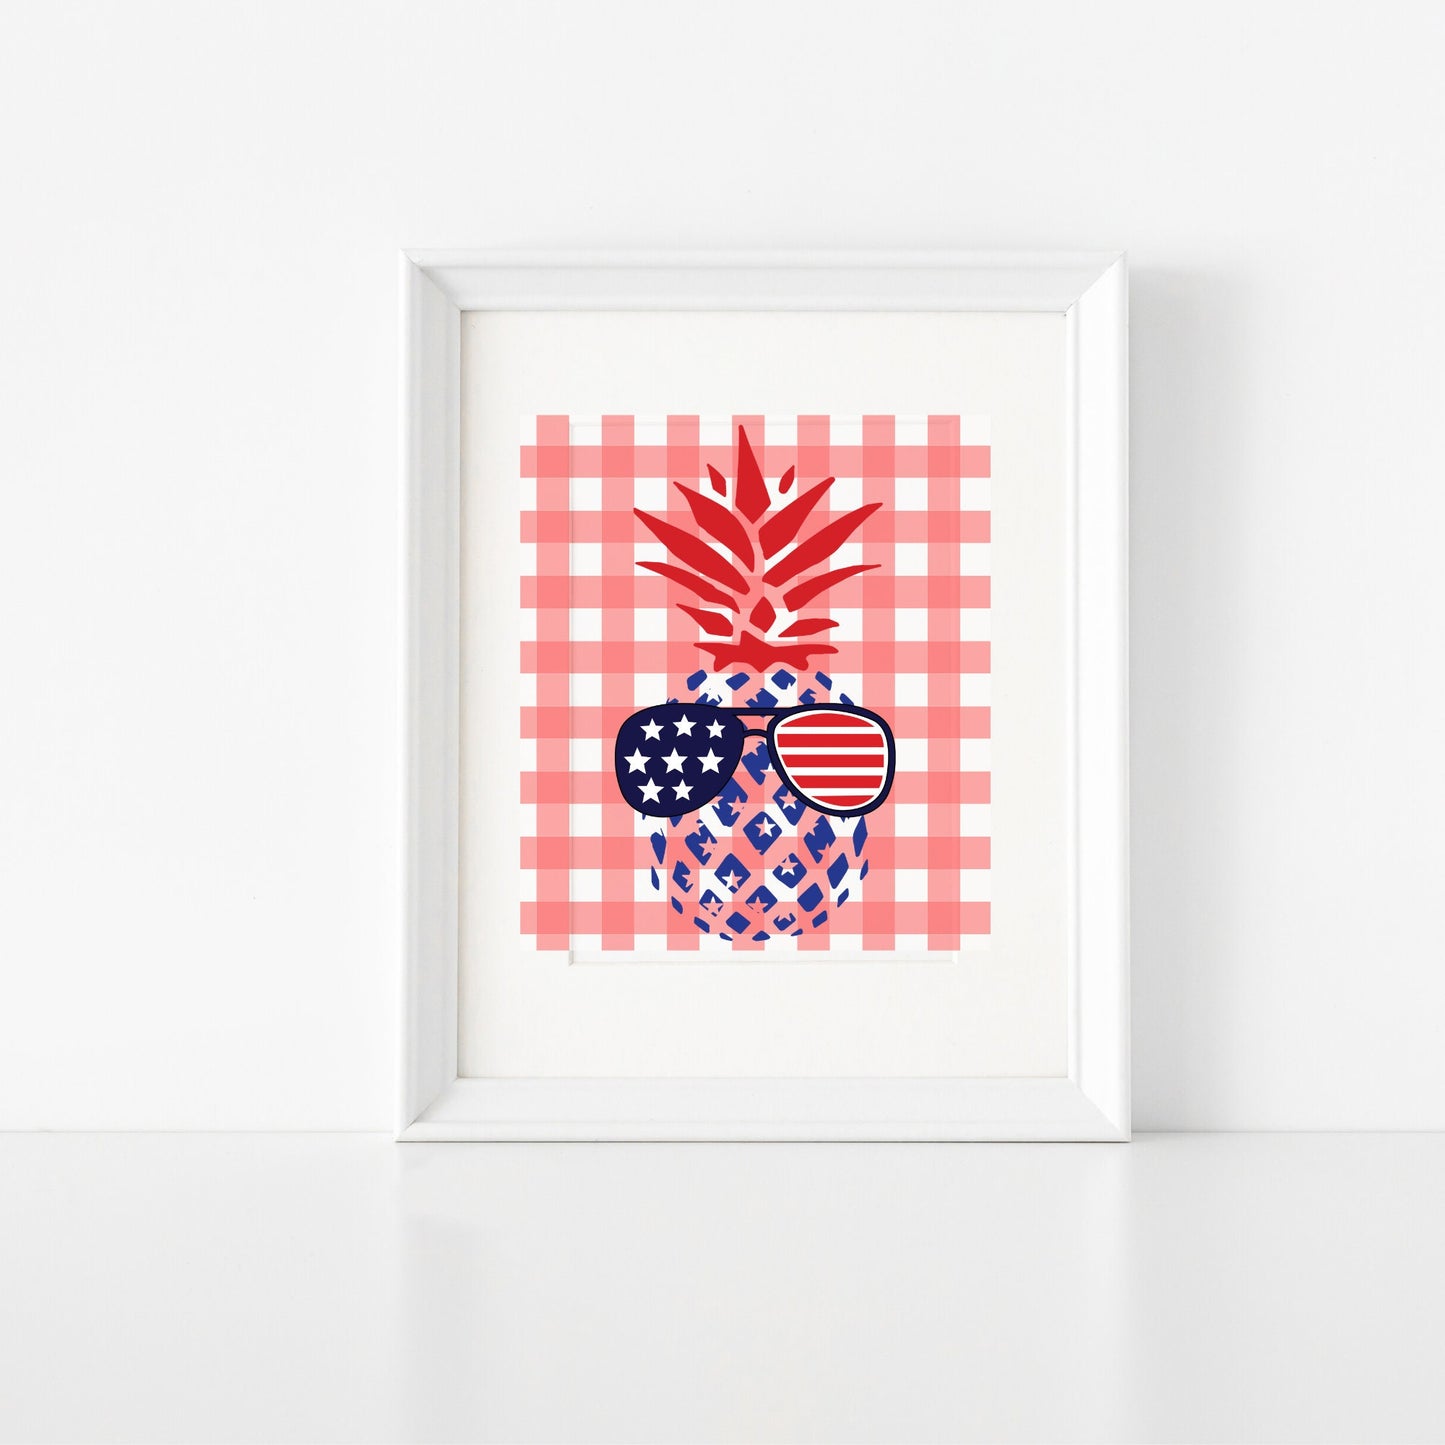 Pineapple Patriotic Summer Art with Pink Buffalo Check